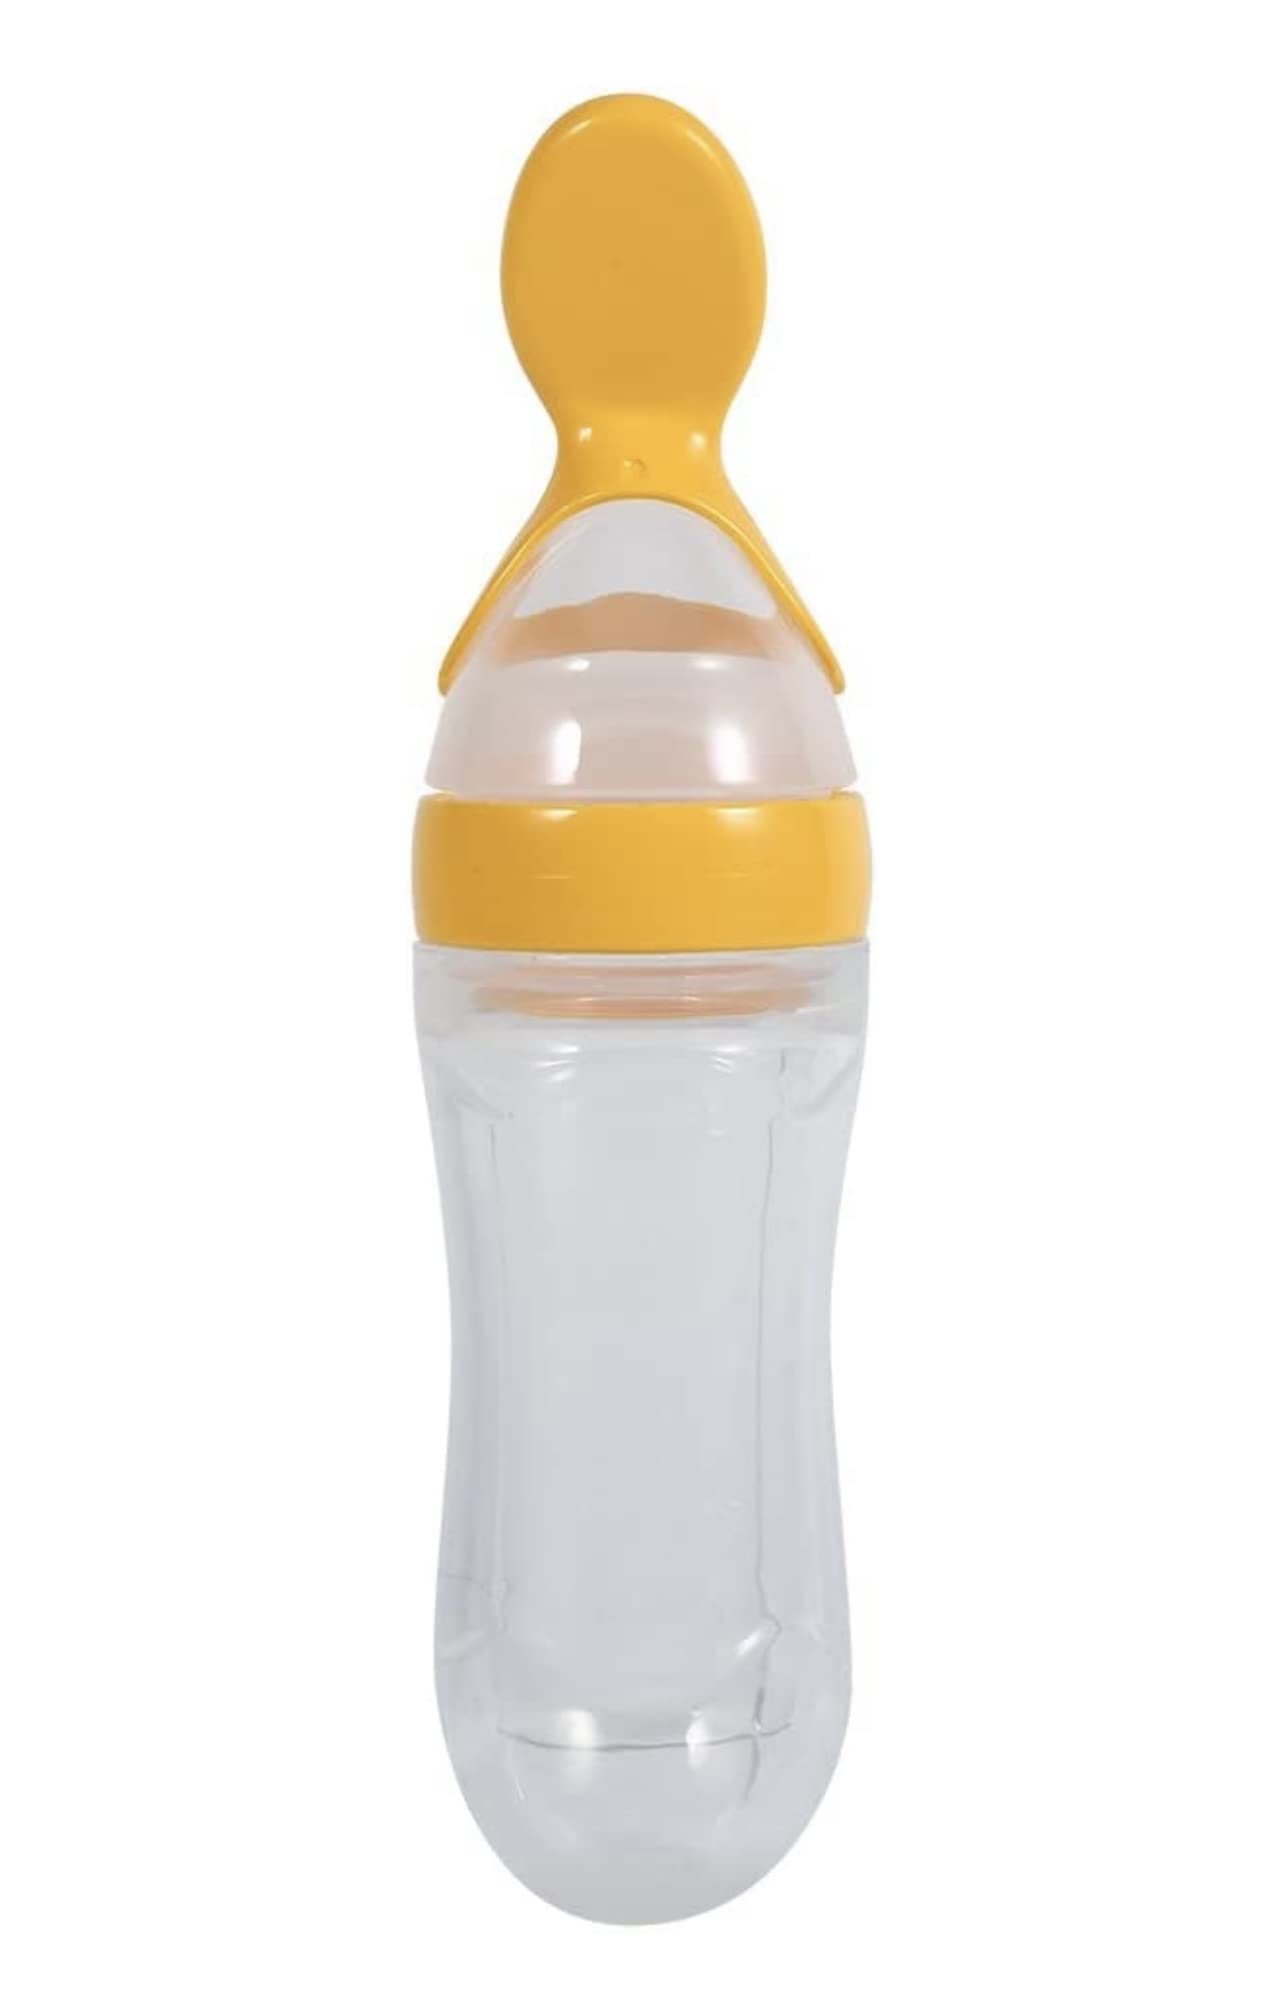 Baby Silicone Feeding Bottle Spoon Baby Food Feeder with Standing Base for  Infant Dispensing and Feeding (Yellow)